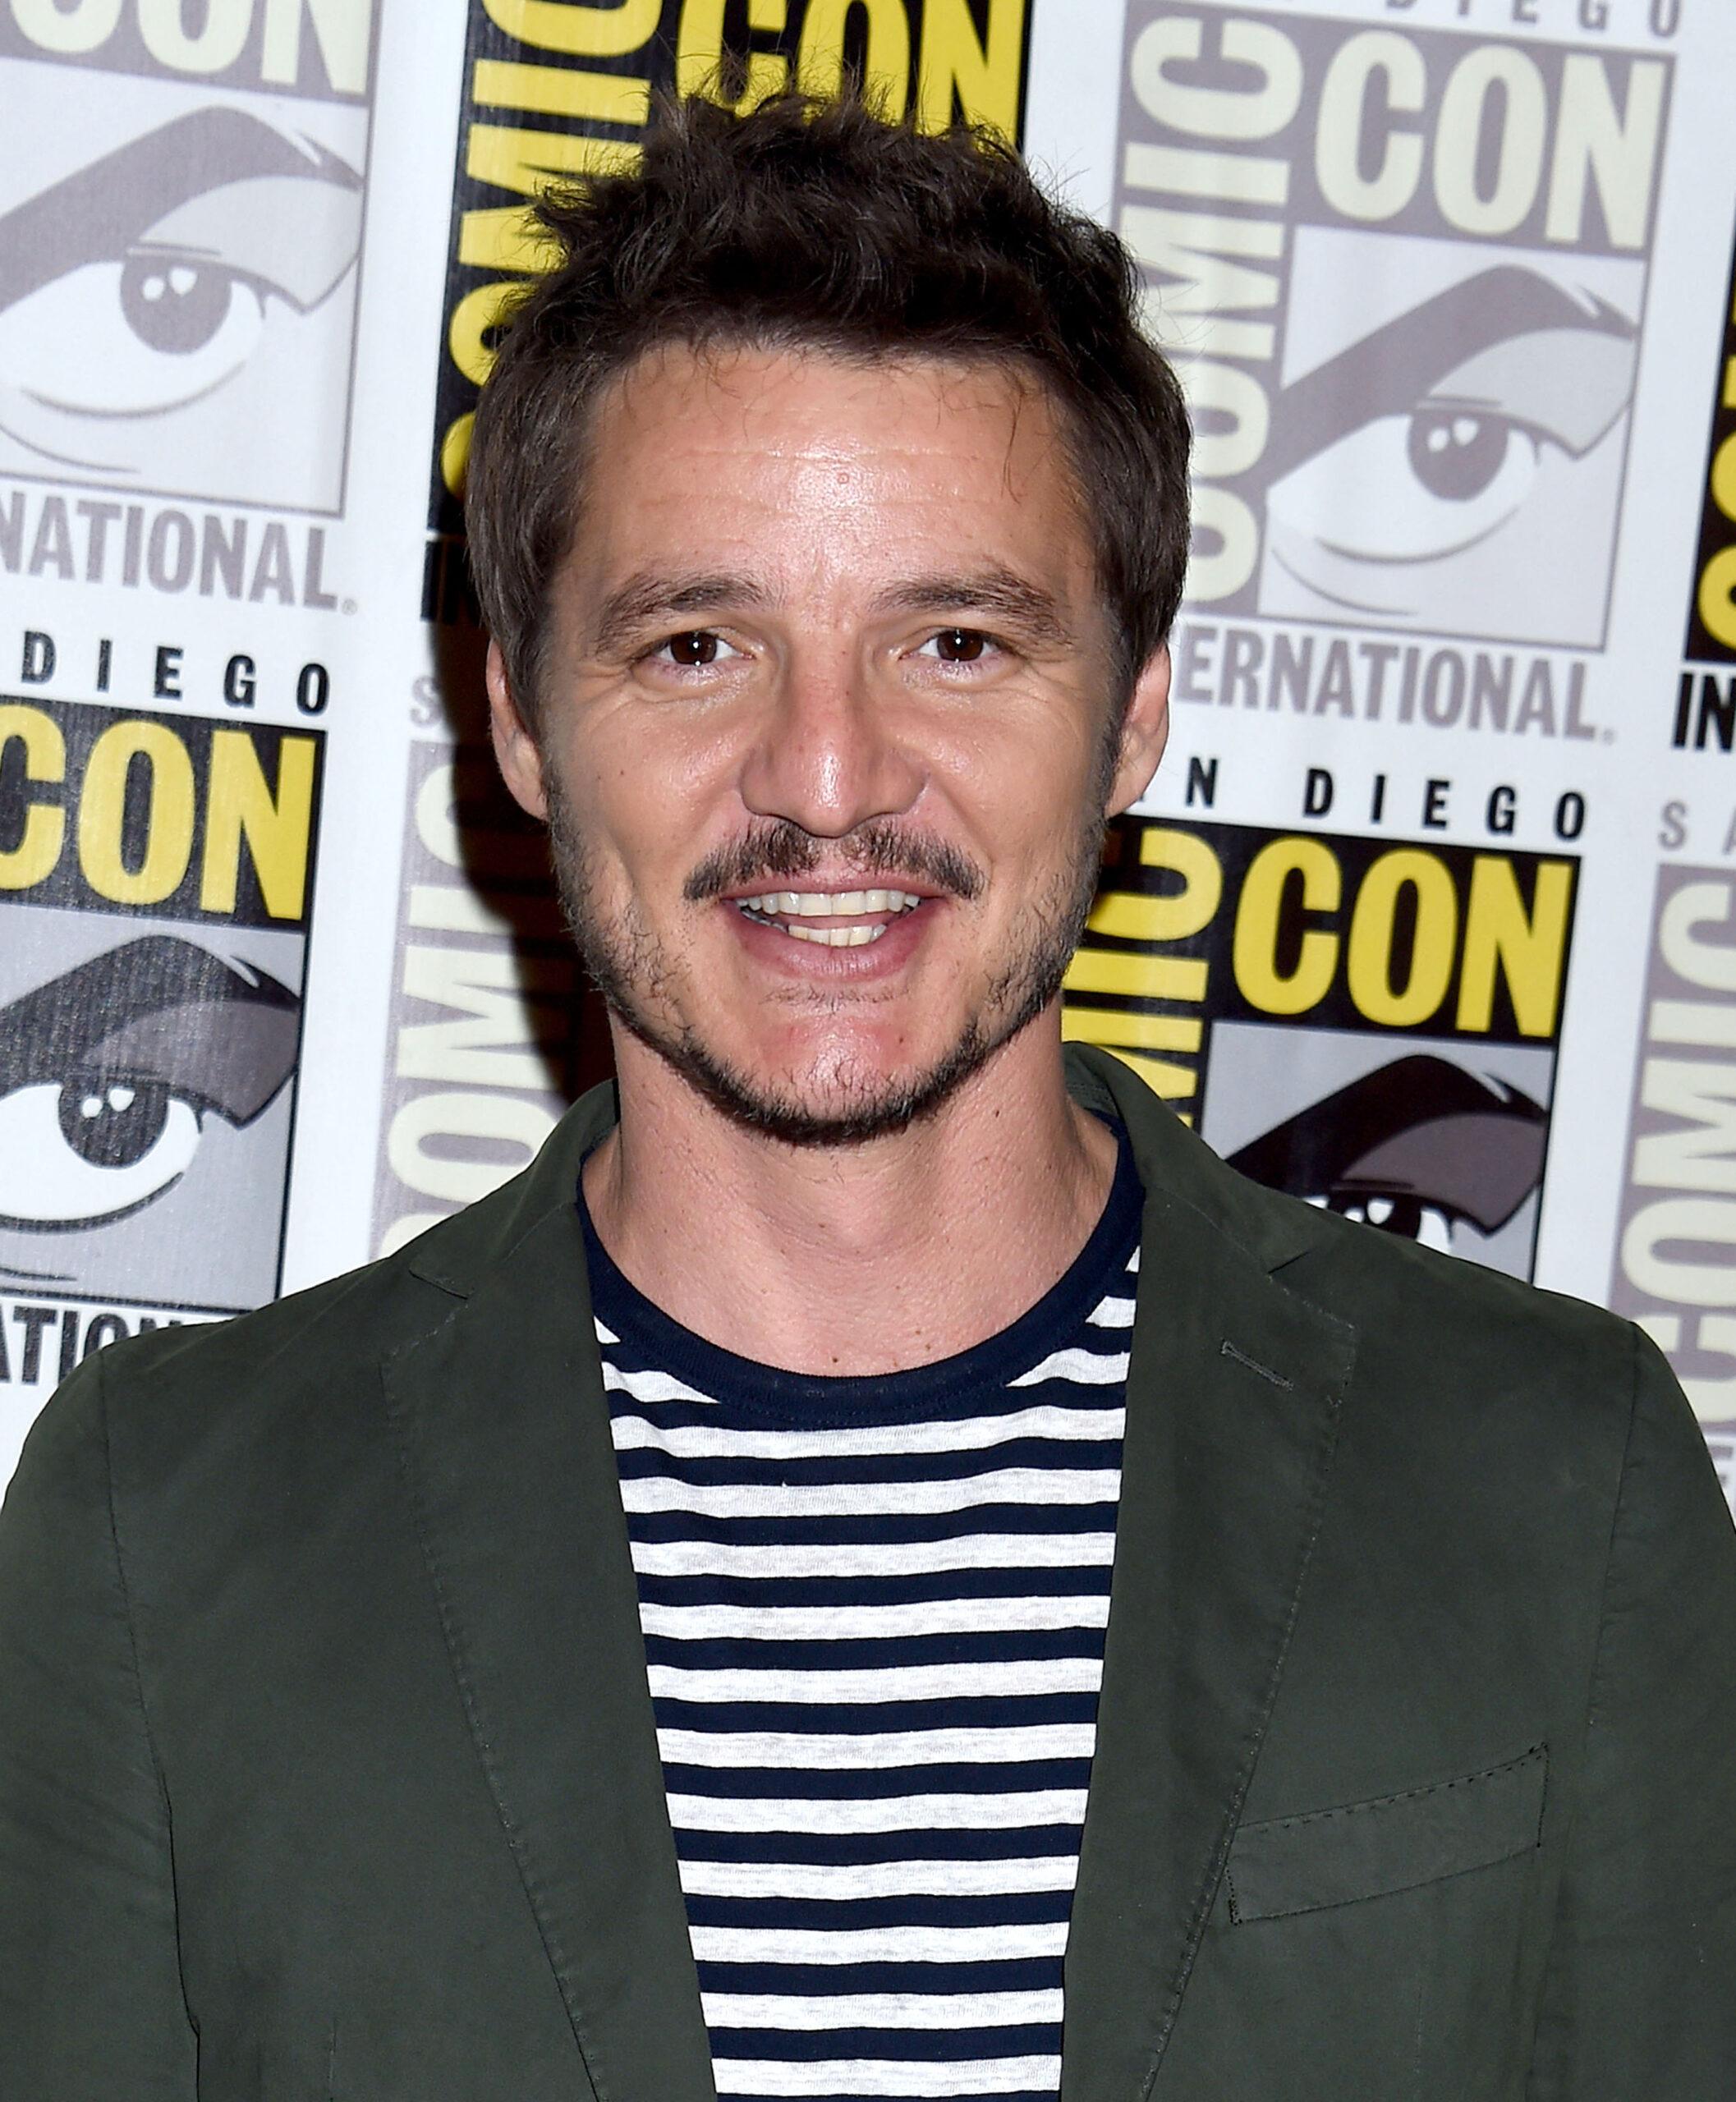 Pedro Pascal called Hot New Stars of 2021